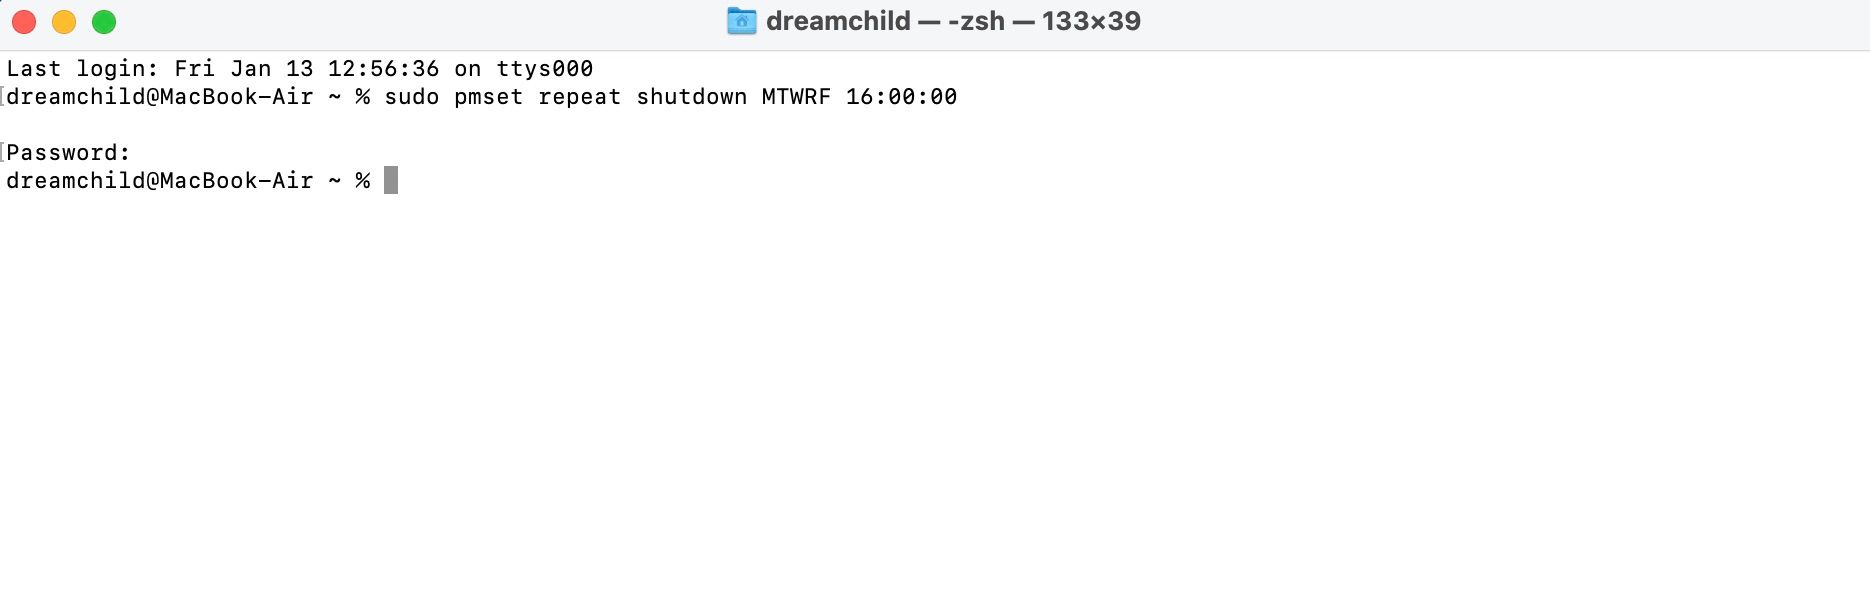 Terminal command line with shut down schedule command